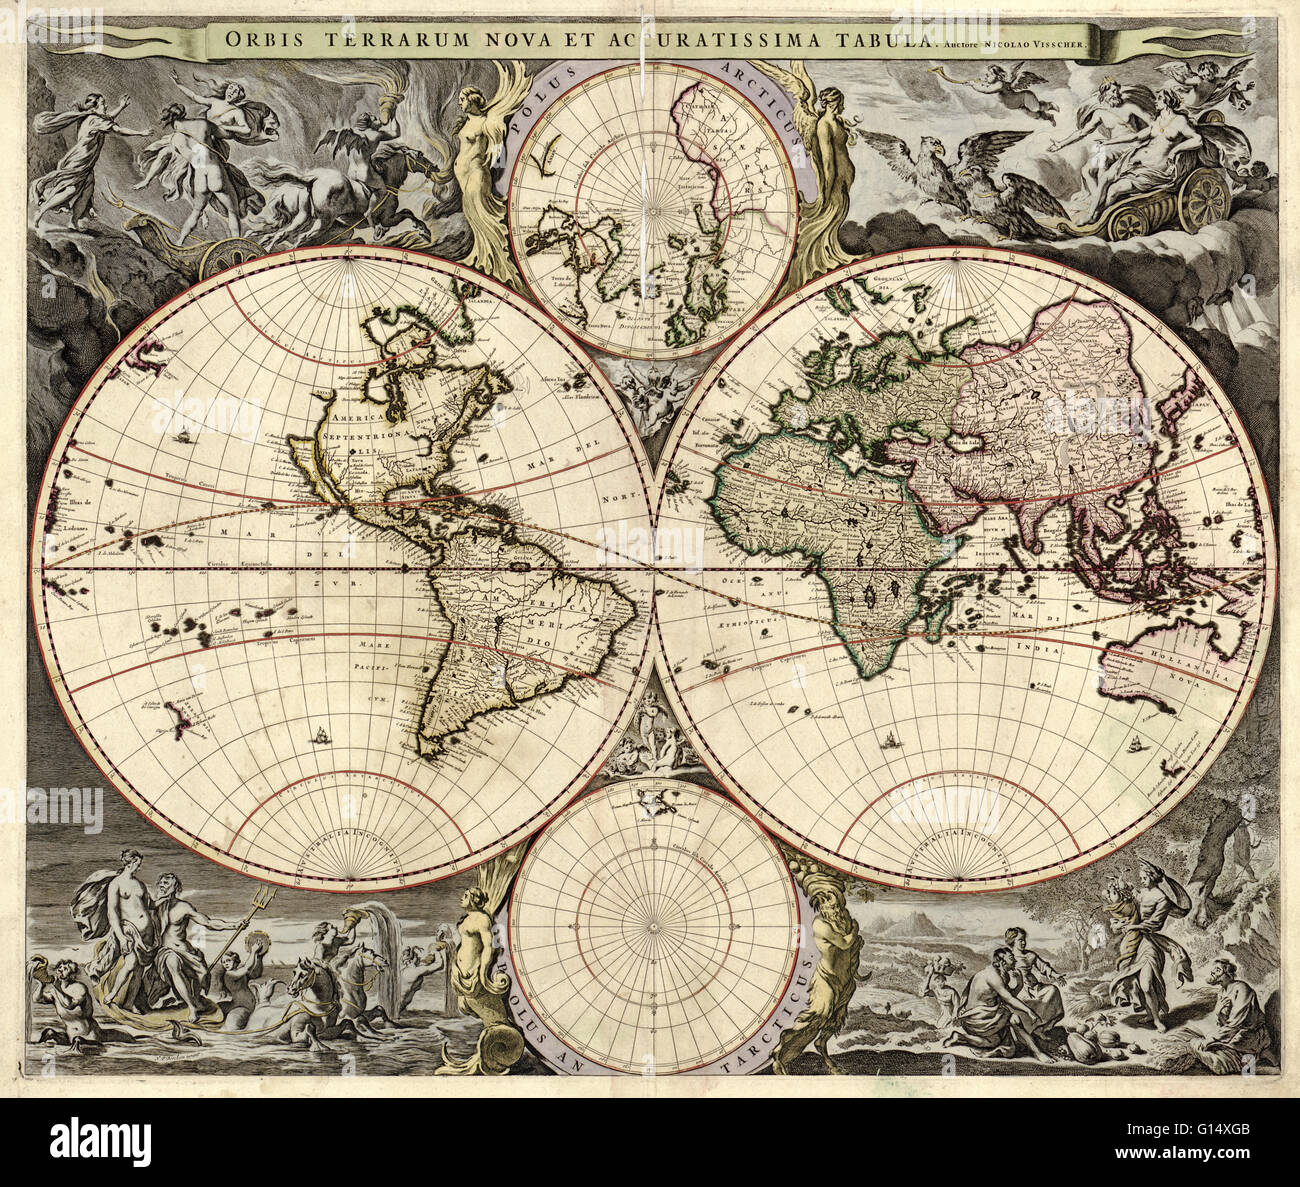 17th century map of the world. Published in Amsterdam, this is a 1690 edition of a 1658 map by the Dutch cartographer Nicolaes Visscher (1649-1702). It shows the expanding exploration of the known world. The map divides the Earth into a western and easter Stock Photo